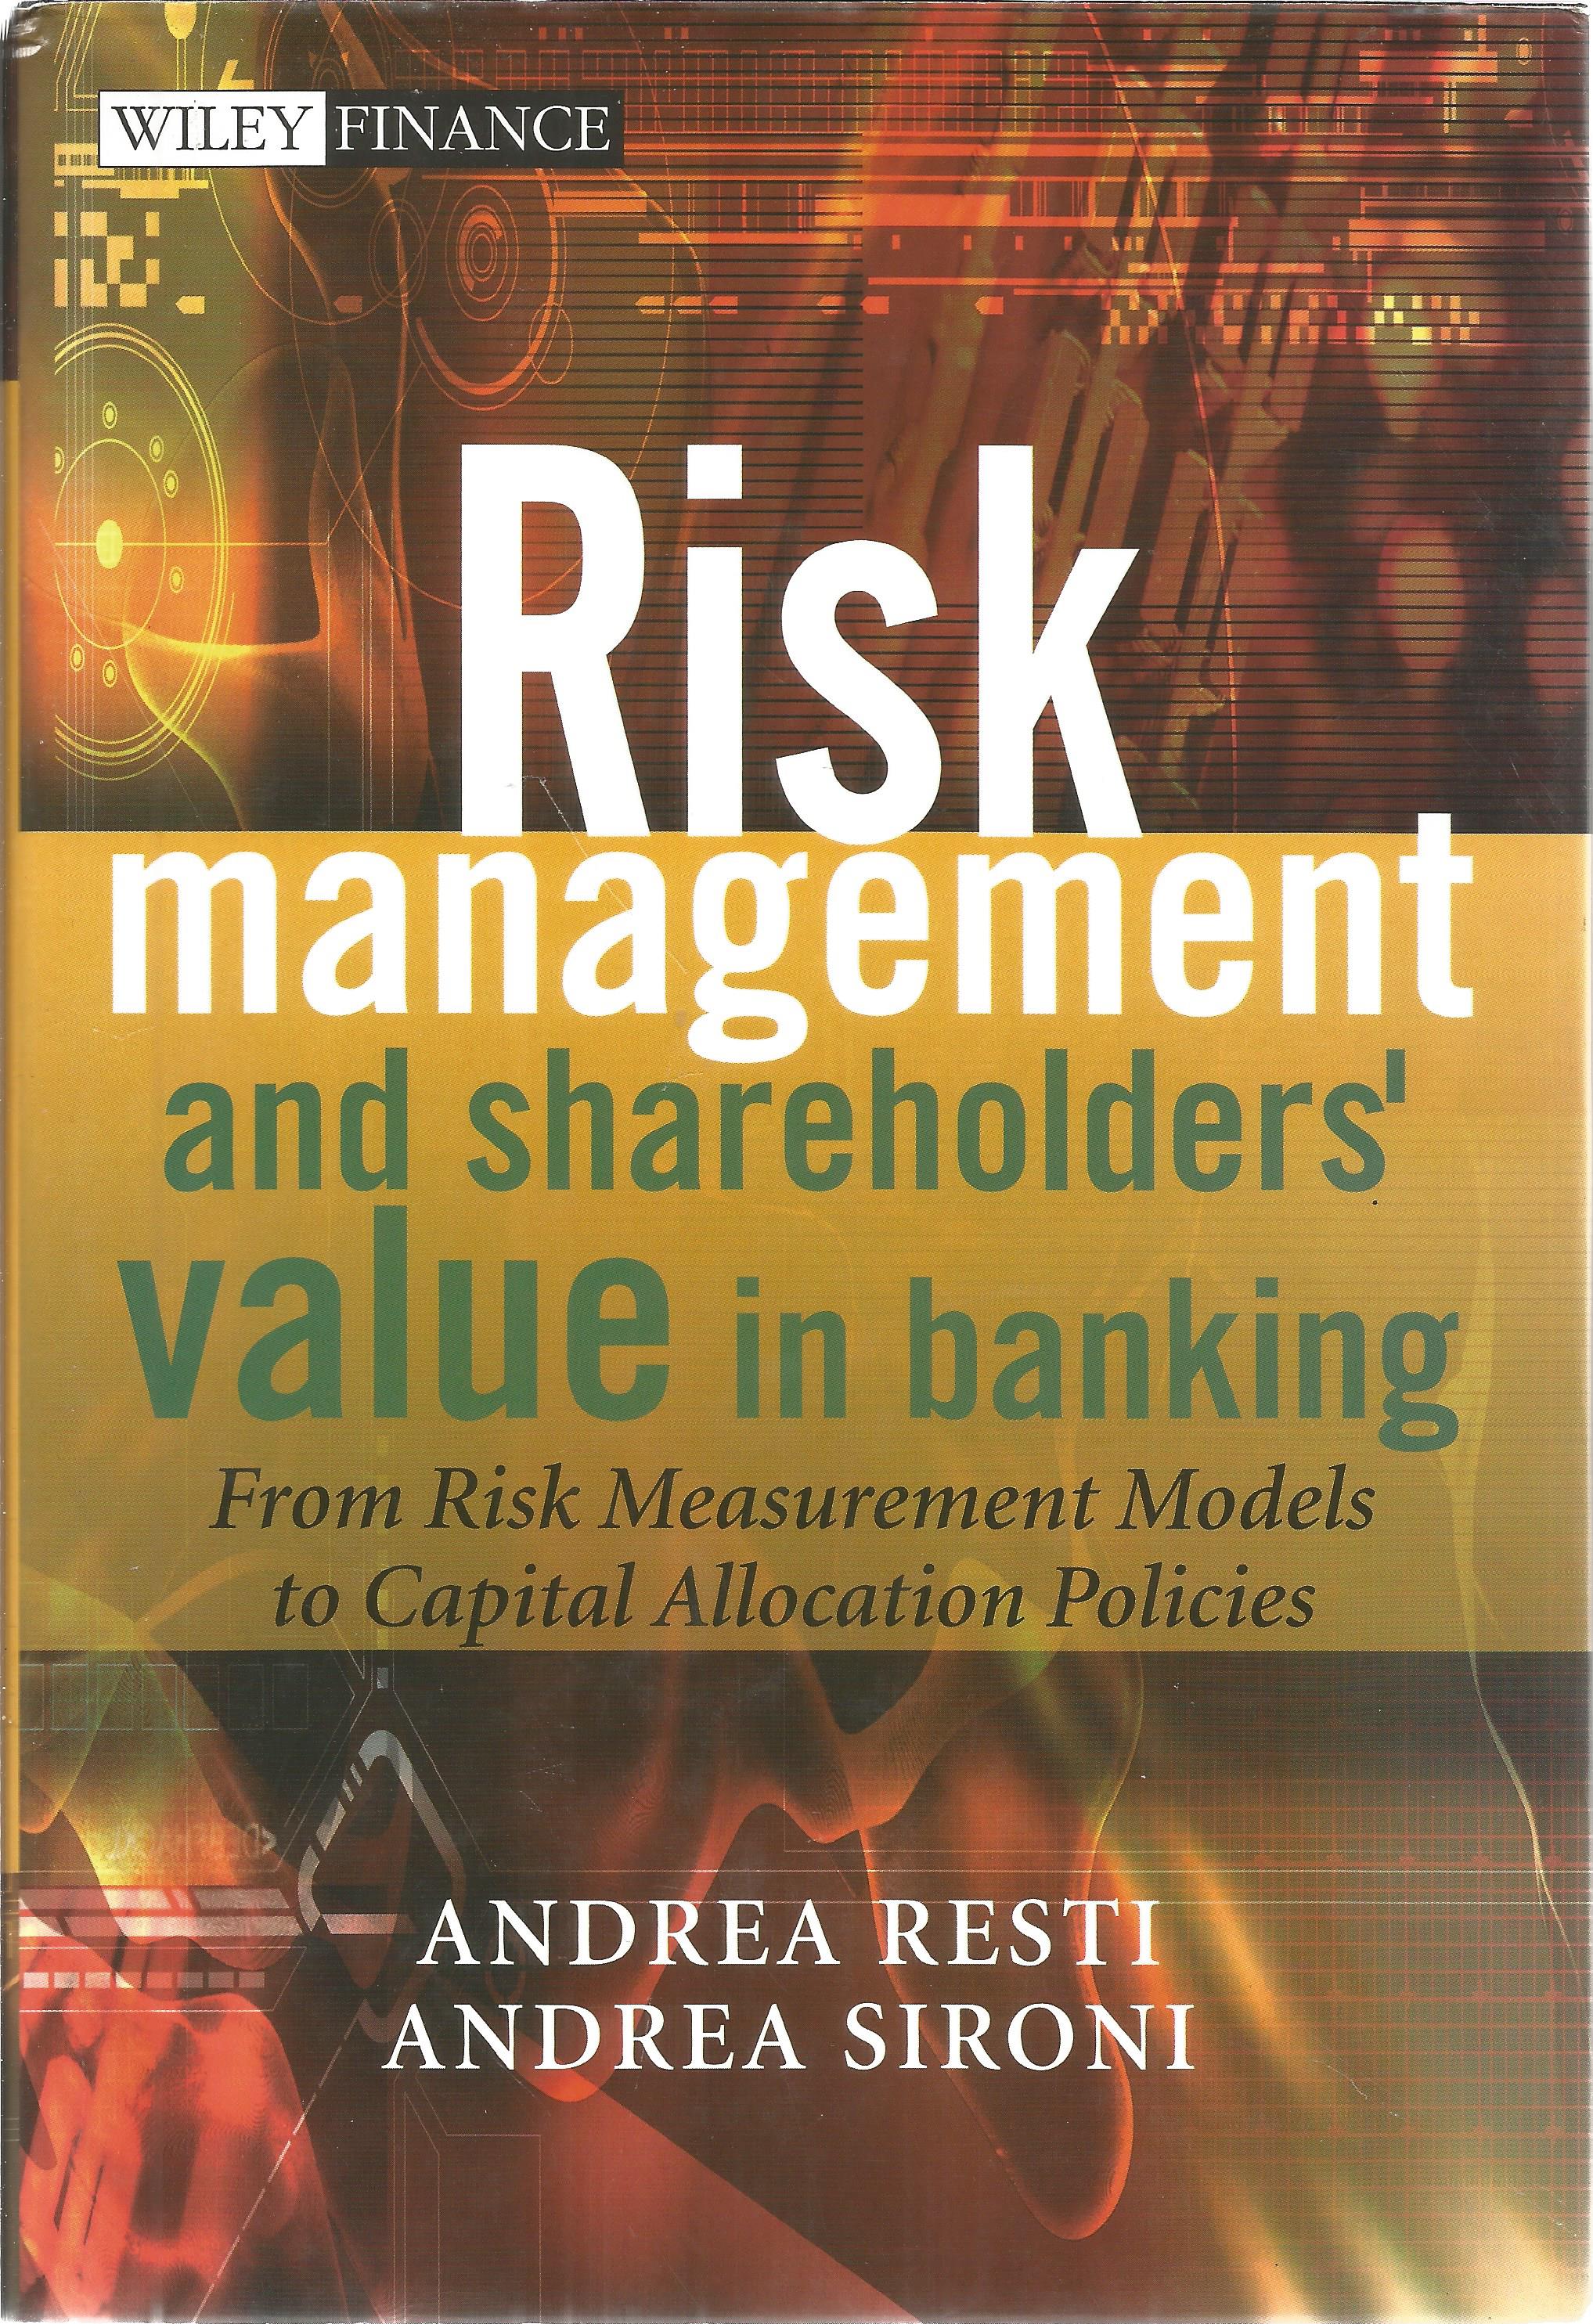 Risk Management and shareholders' value in banking by Andrea Resti and Andrea Sironi. A finance book